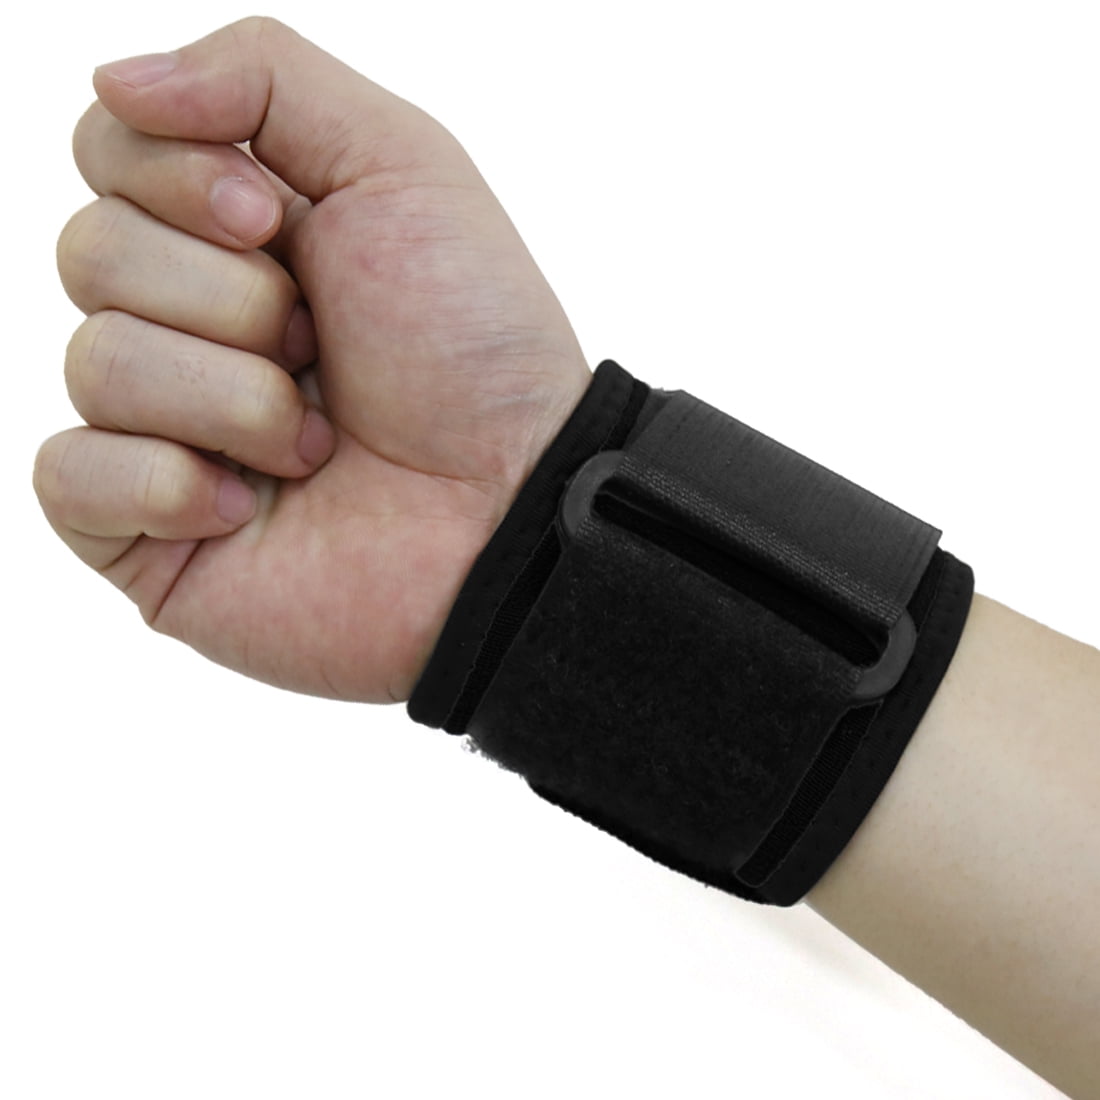 1 Pair Adjustable Wristbands Wrist Support Bandage Gym Strap Safety Guard